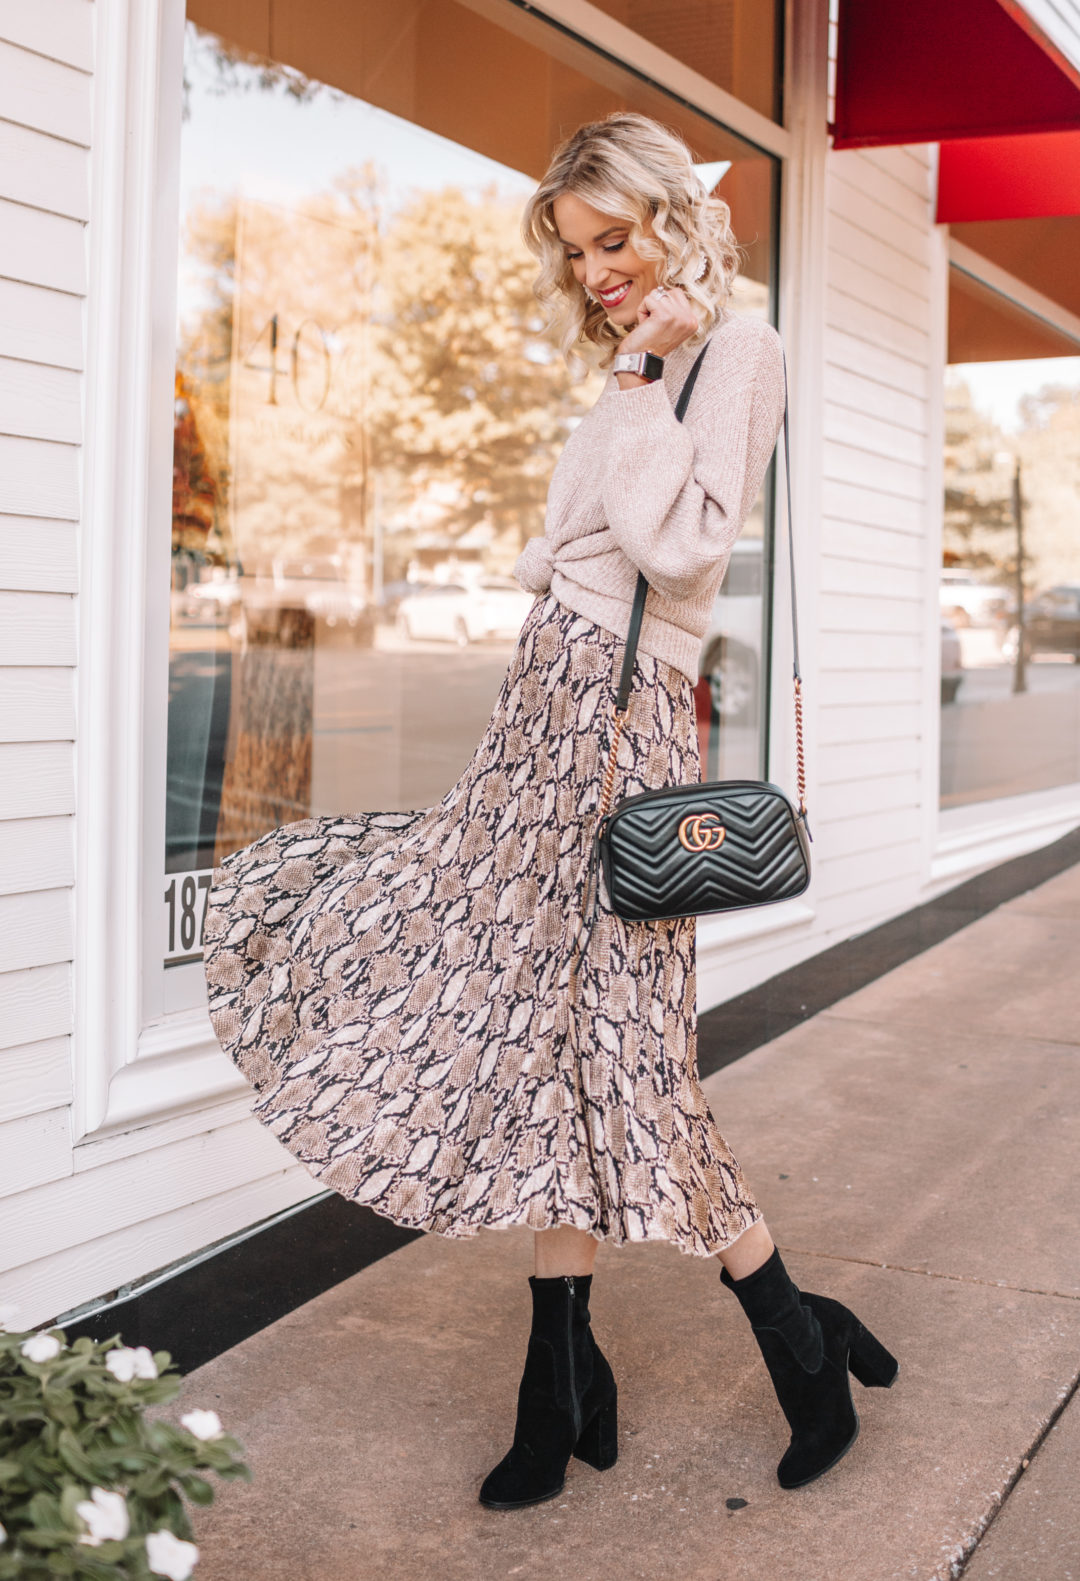 How to Wear a Midi Skirt - 10 Ways to Wear a Midi Skirt - Straight A Style